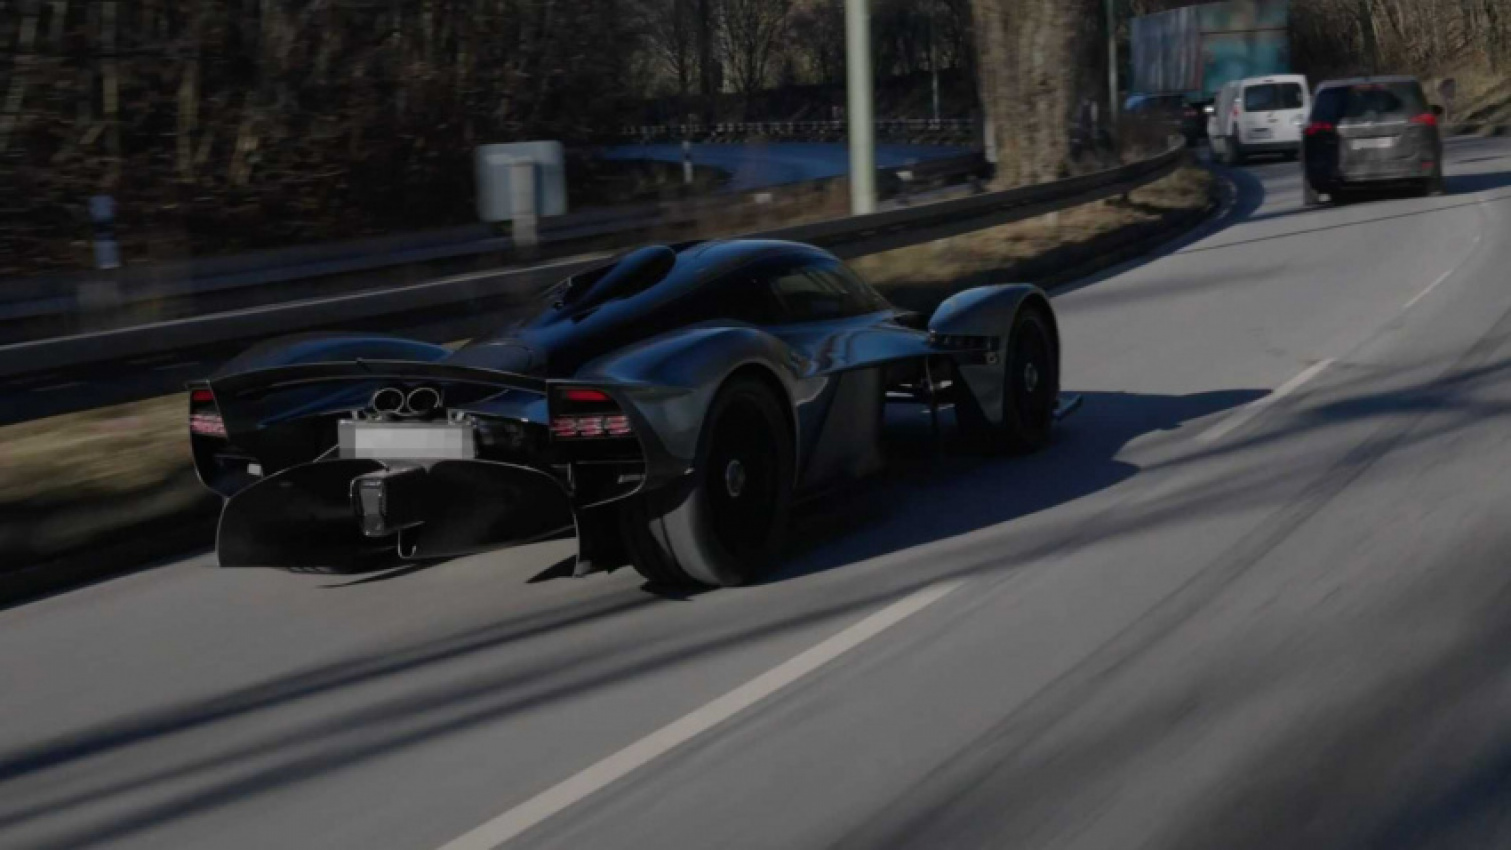 aston martin, autos, cars, reviews, car, cars, driven, driven nz, hybrid, just listen to that v12, motoring, new zealand, news, nz, v8 supercars, video, video-news, watch: aston martin valkyrie takes to road, world, watch: aston martin valkyrie takes to the road, just listen to that v12